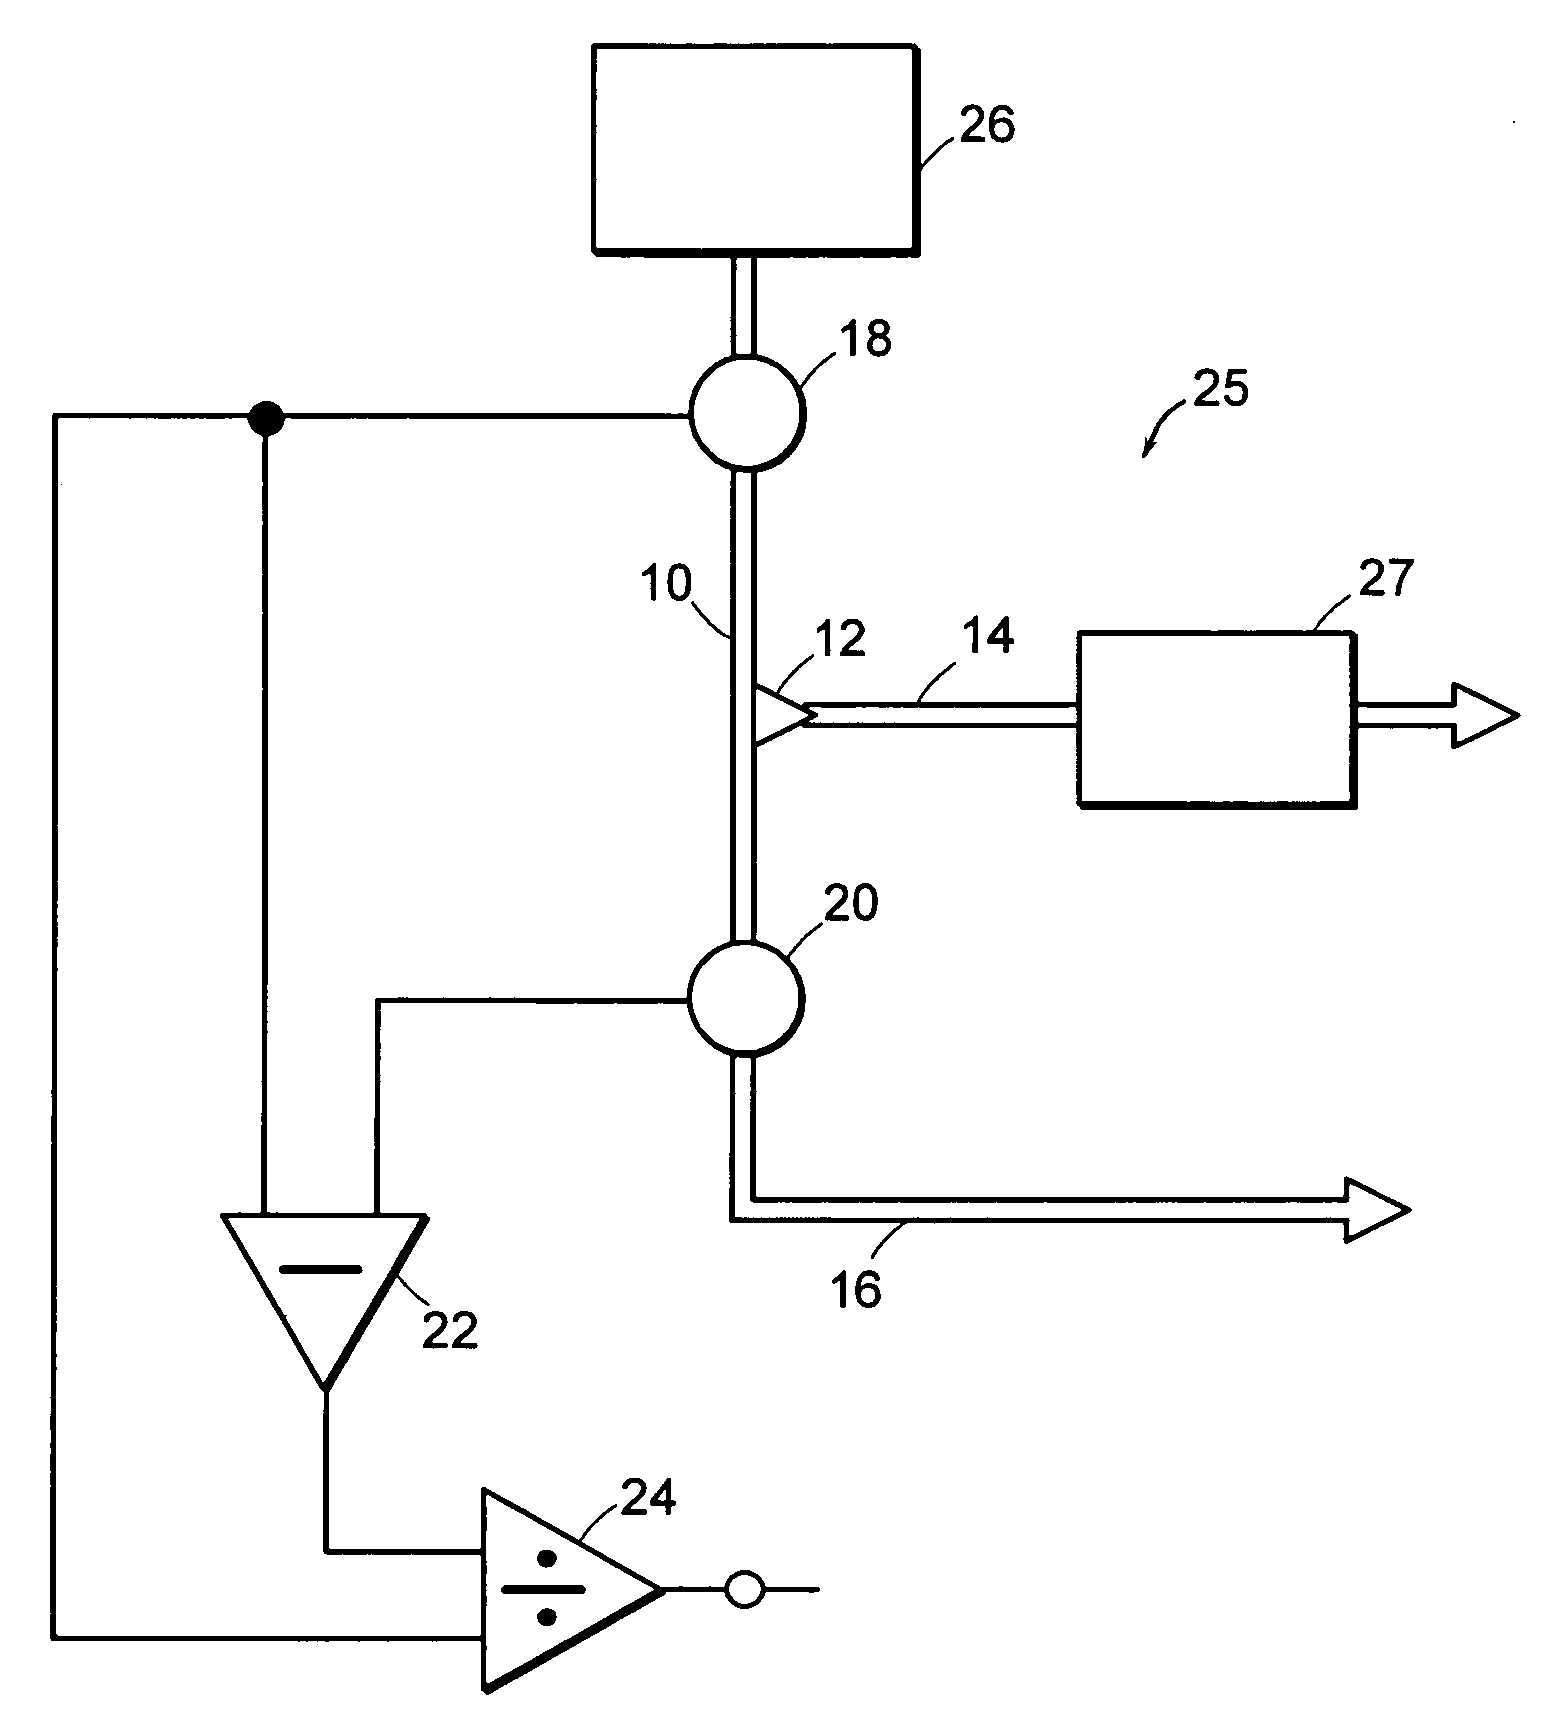 Flow sensing apparatus used to monitor/provide feedback to a split flow pumping system